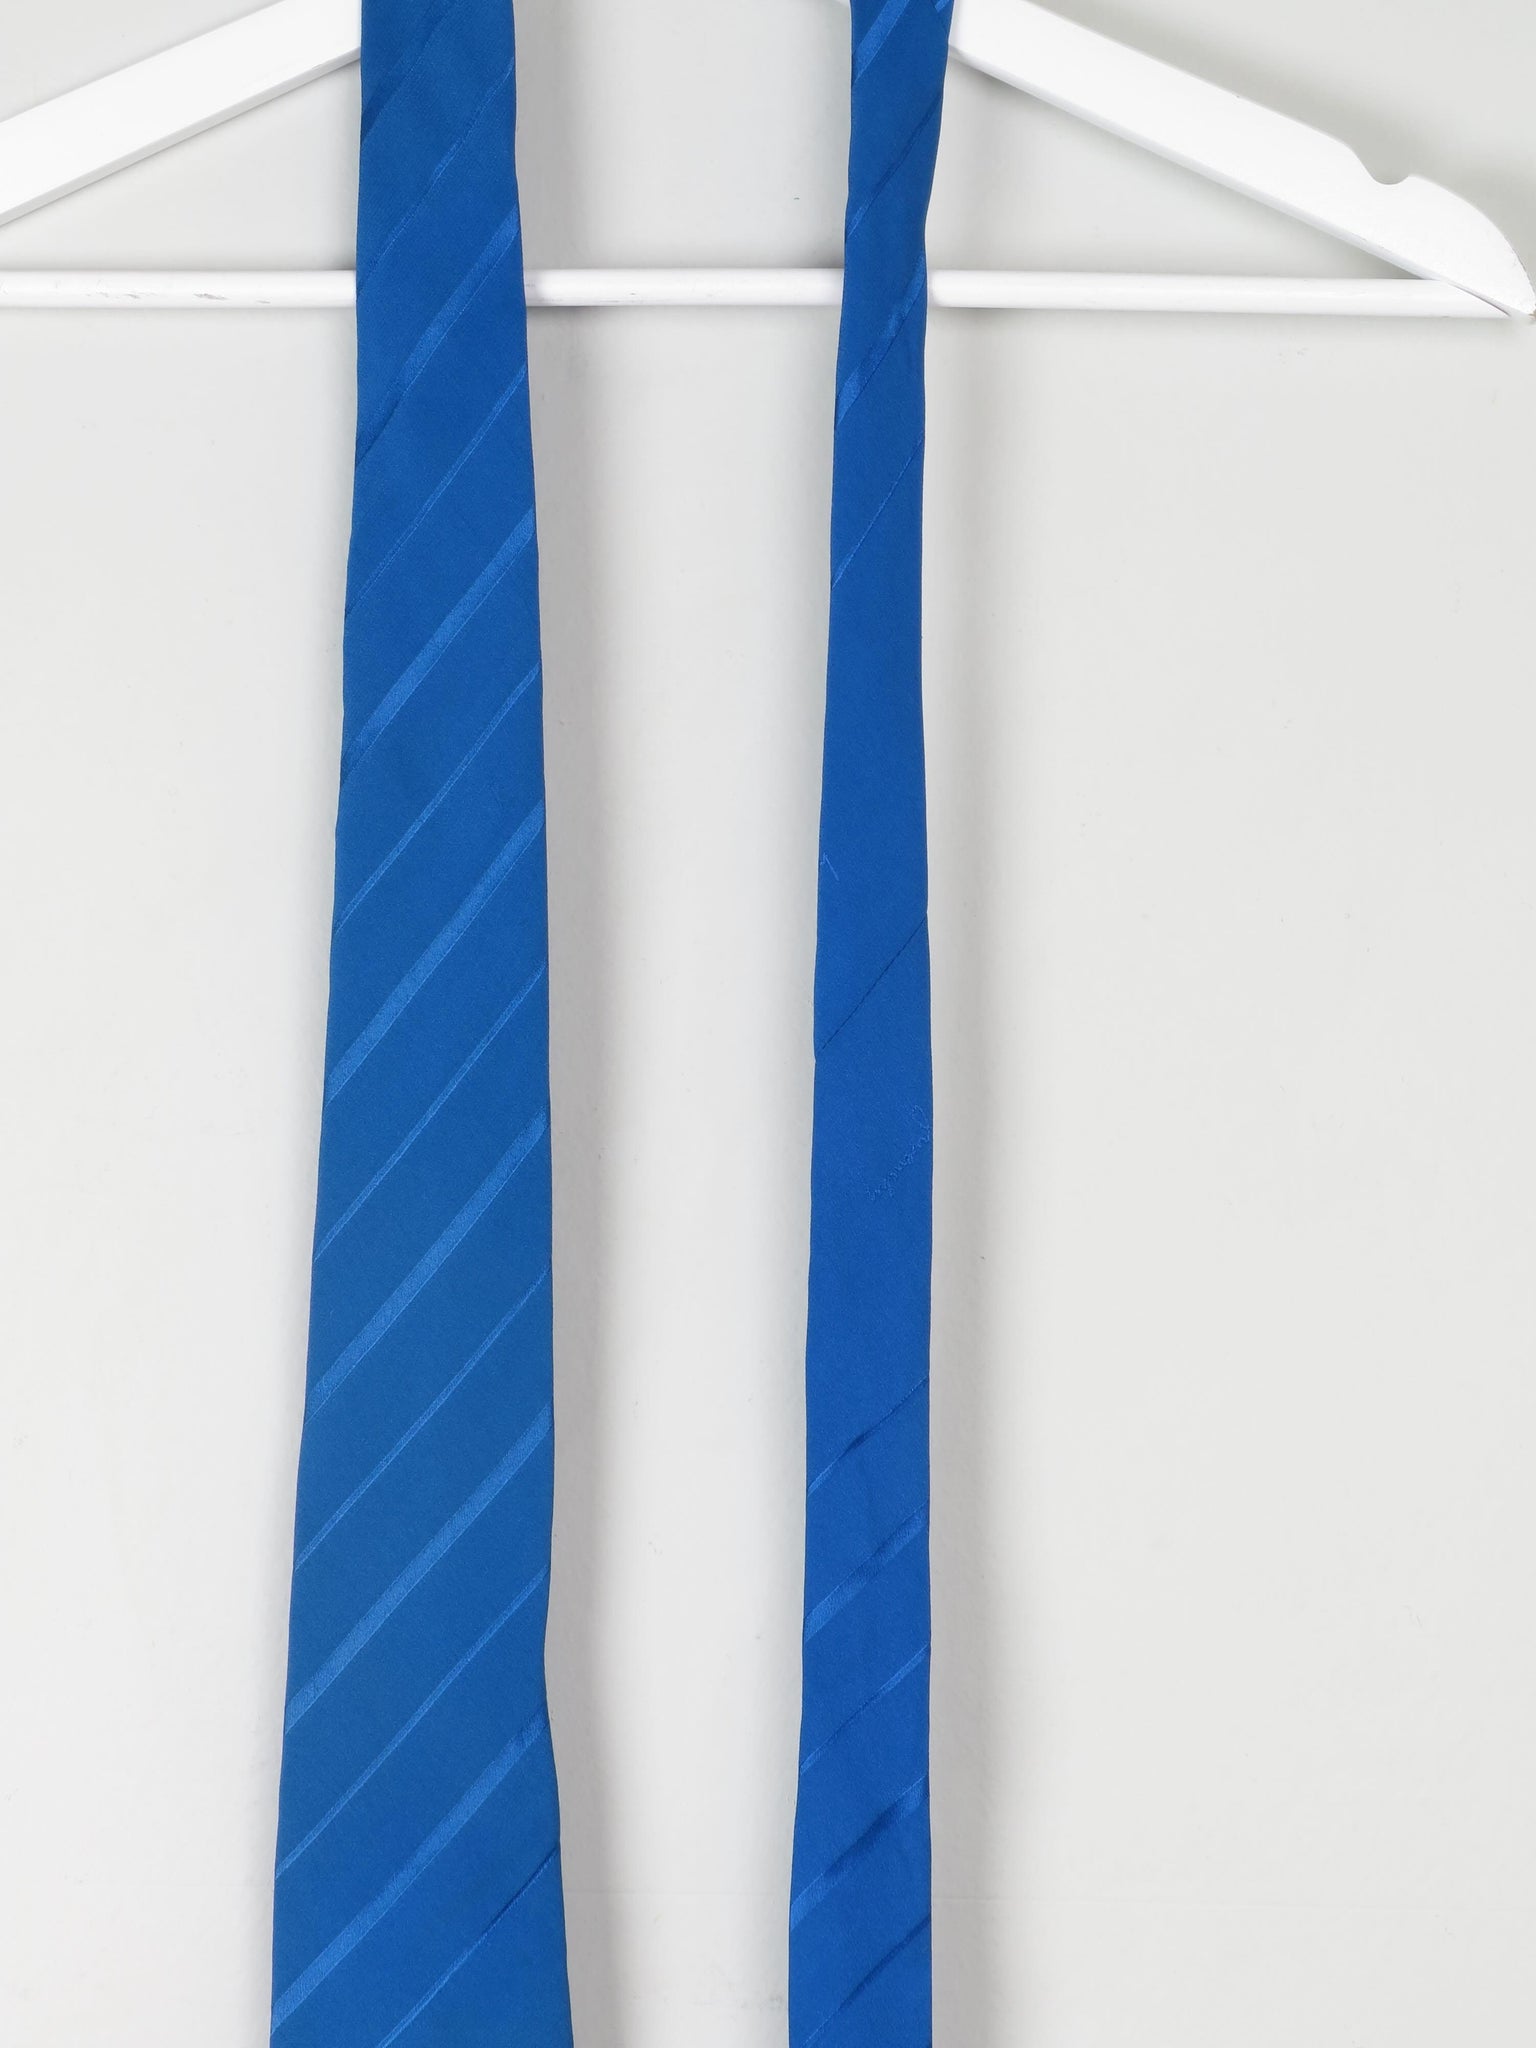 Givenchy Paris Silk Tie Electric Blue - The Harlequin